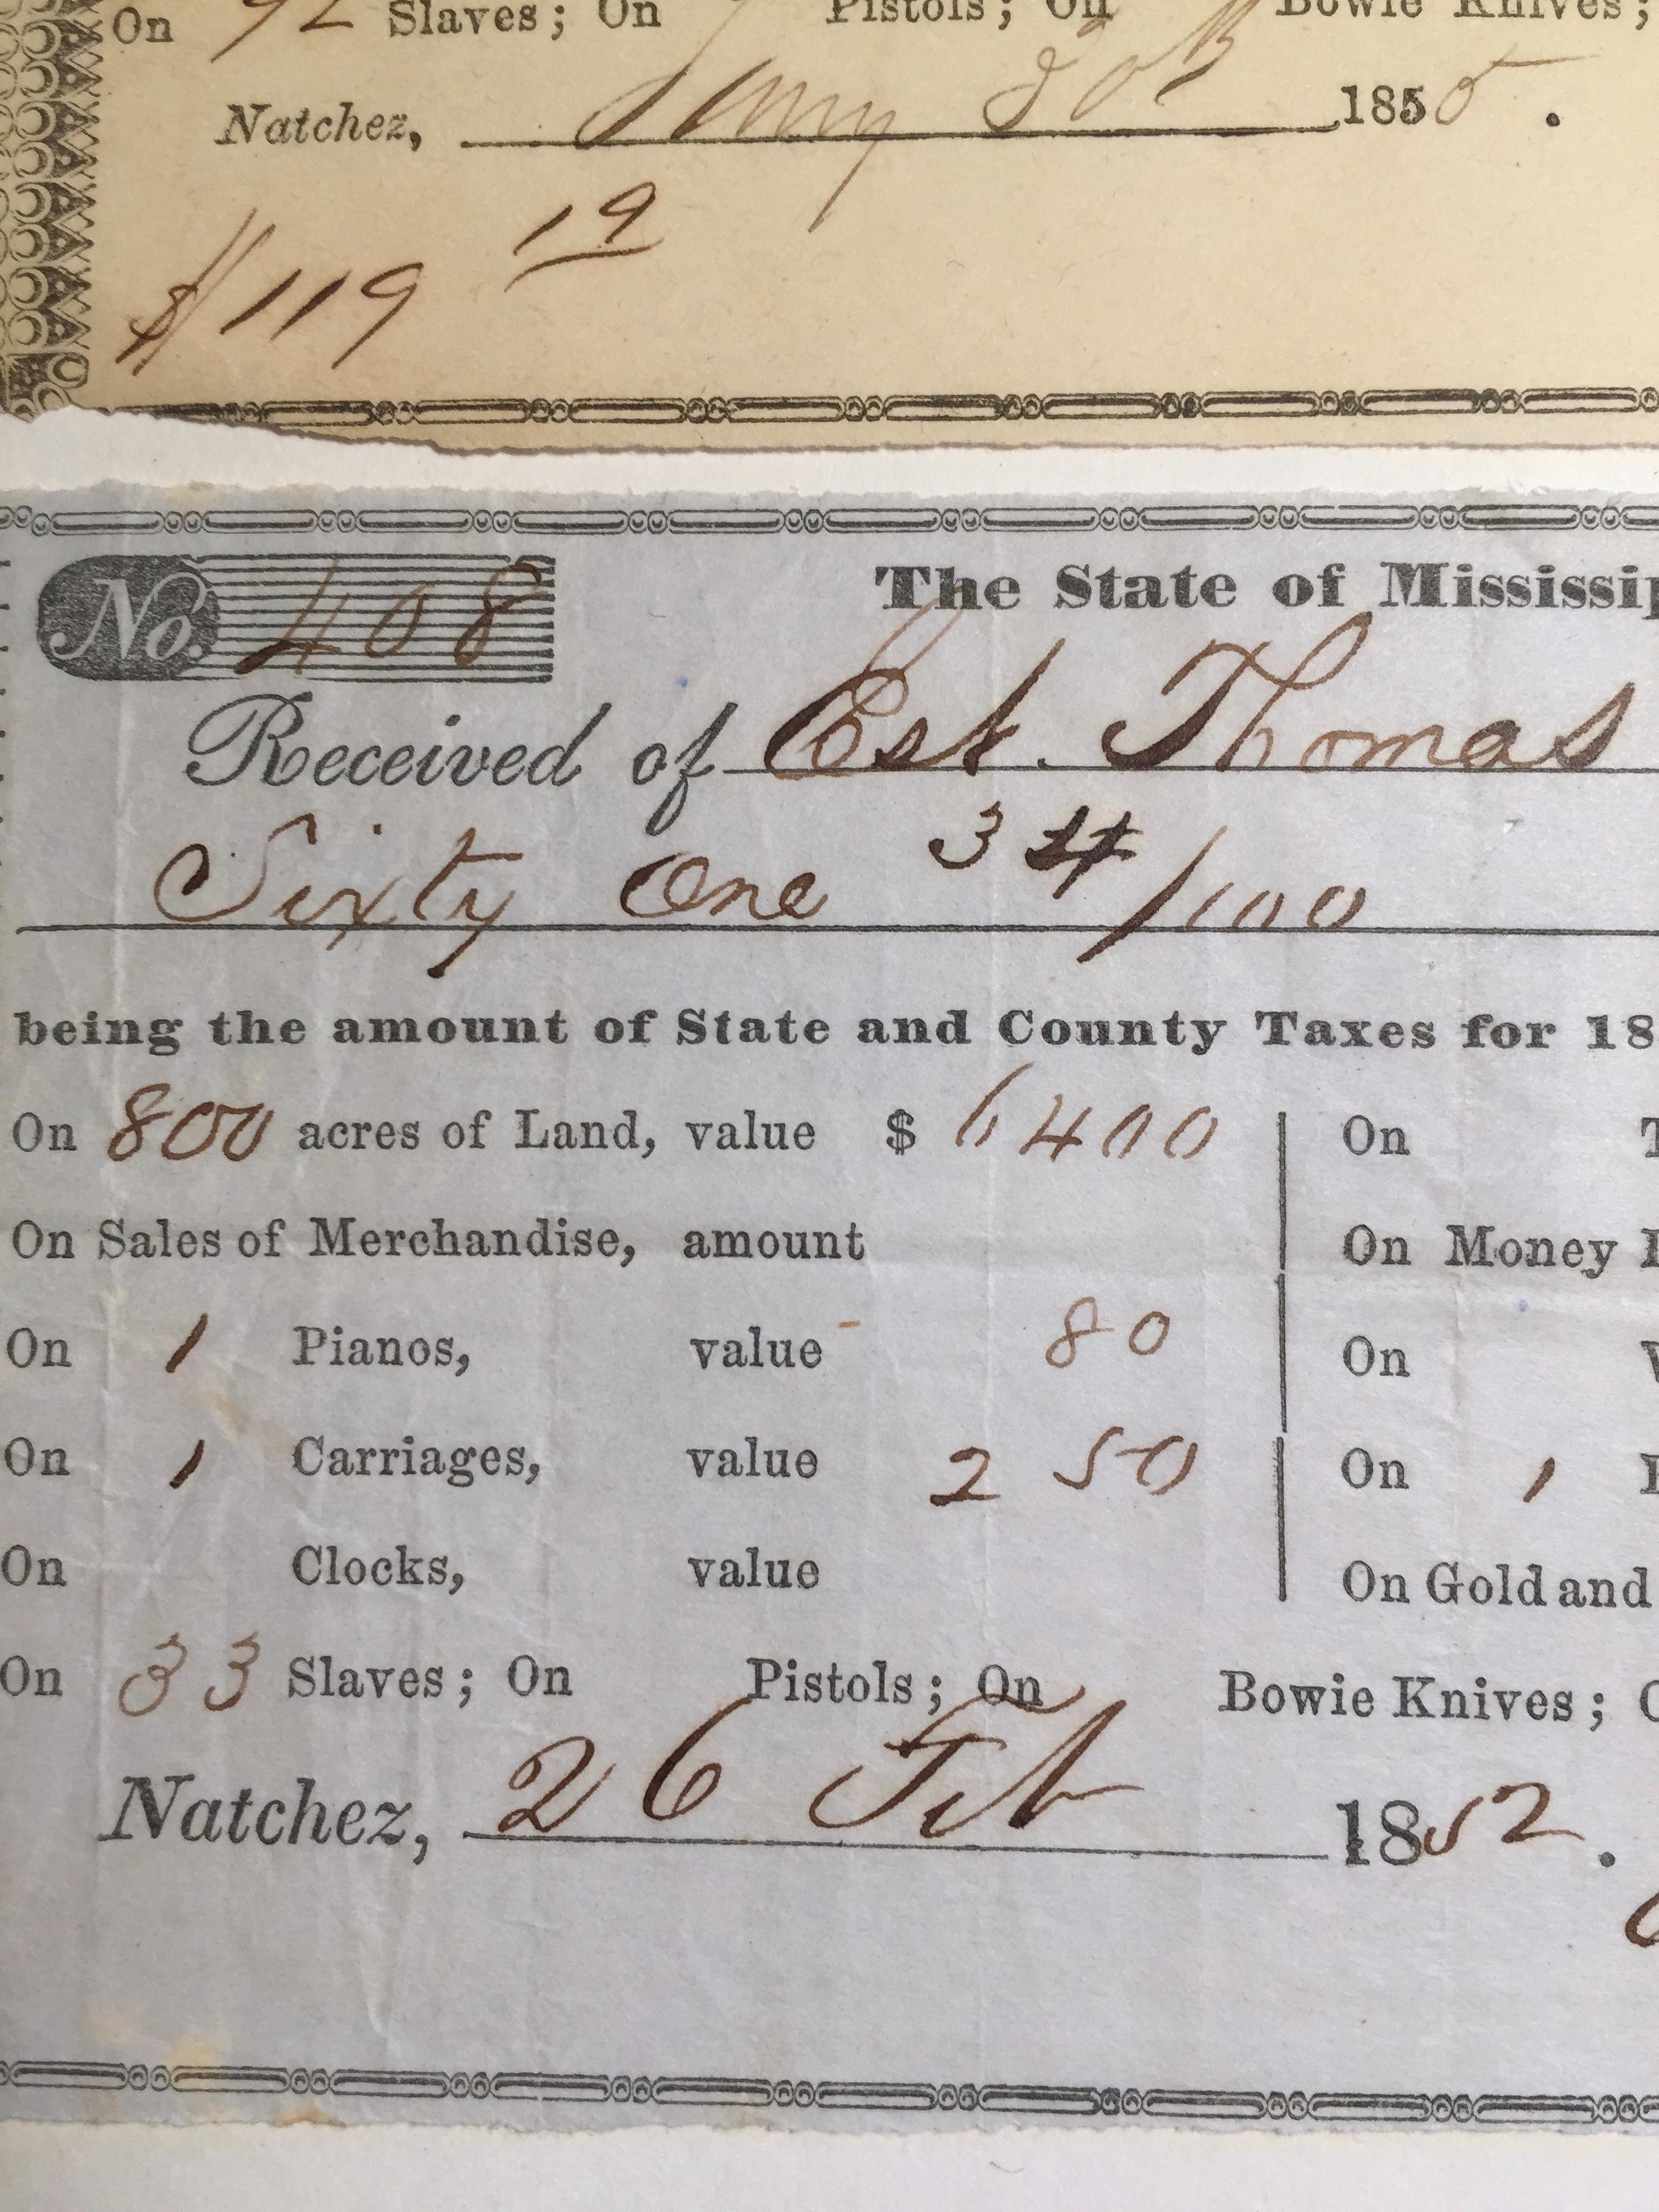 2 SLAVE PROPERTY TAX BILLS - Adams County, Mississippi - 1852 and 1855 - - American Realist Mixed Media Art by Unknown